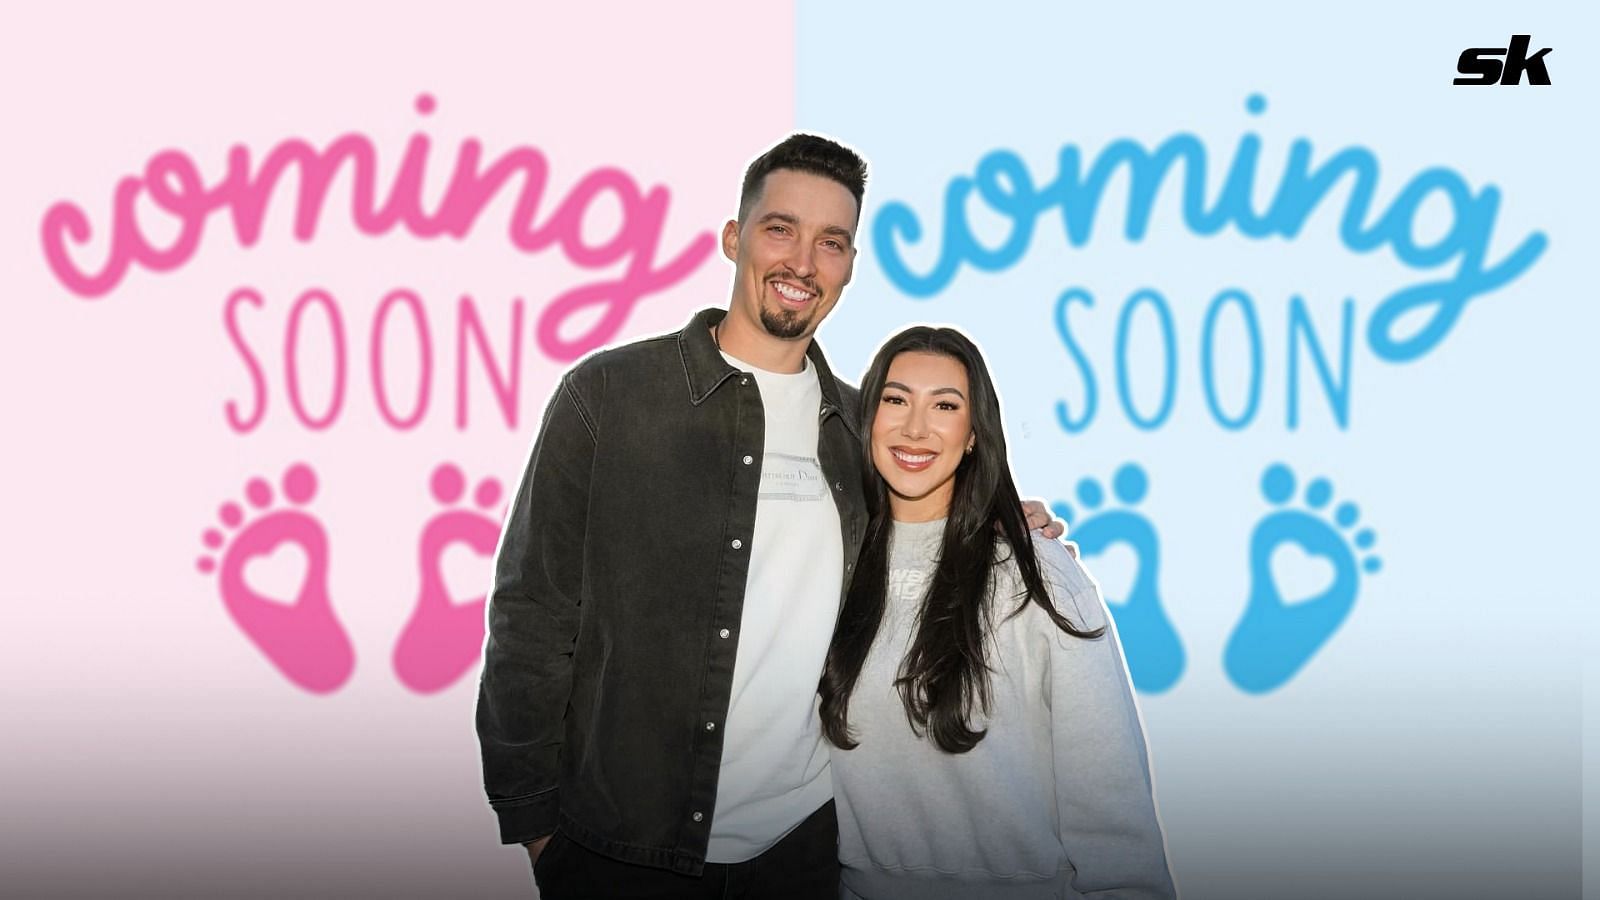 &ldquo;Commence parent era&rdquo; - Blake Snell and girlfriend Haeley Mar announce baby news with heartwarming social media snapshots